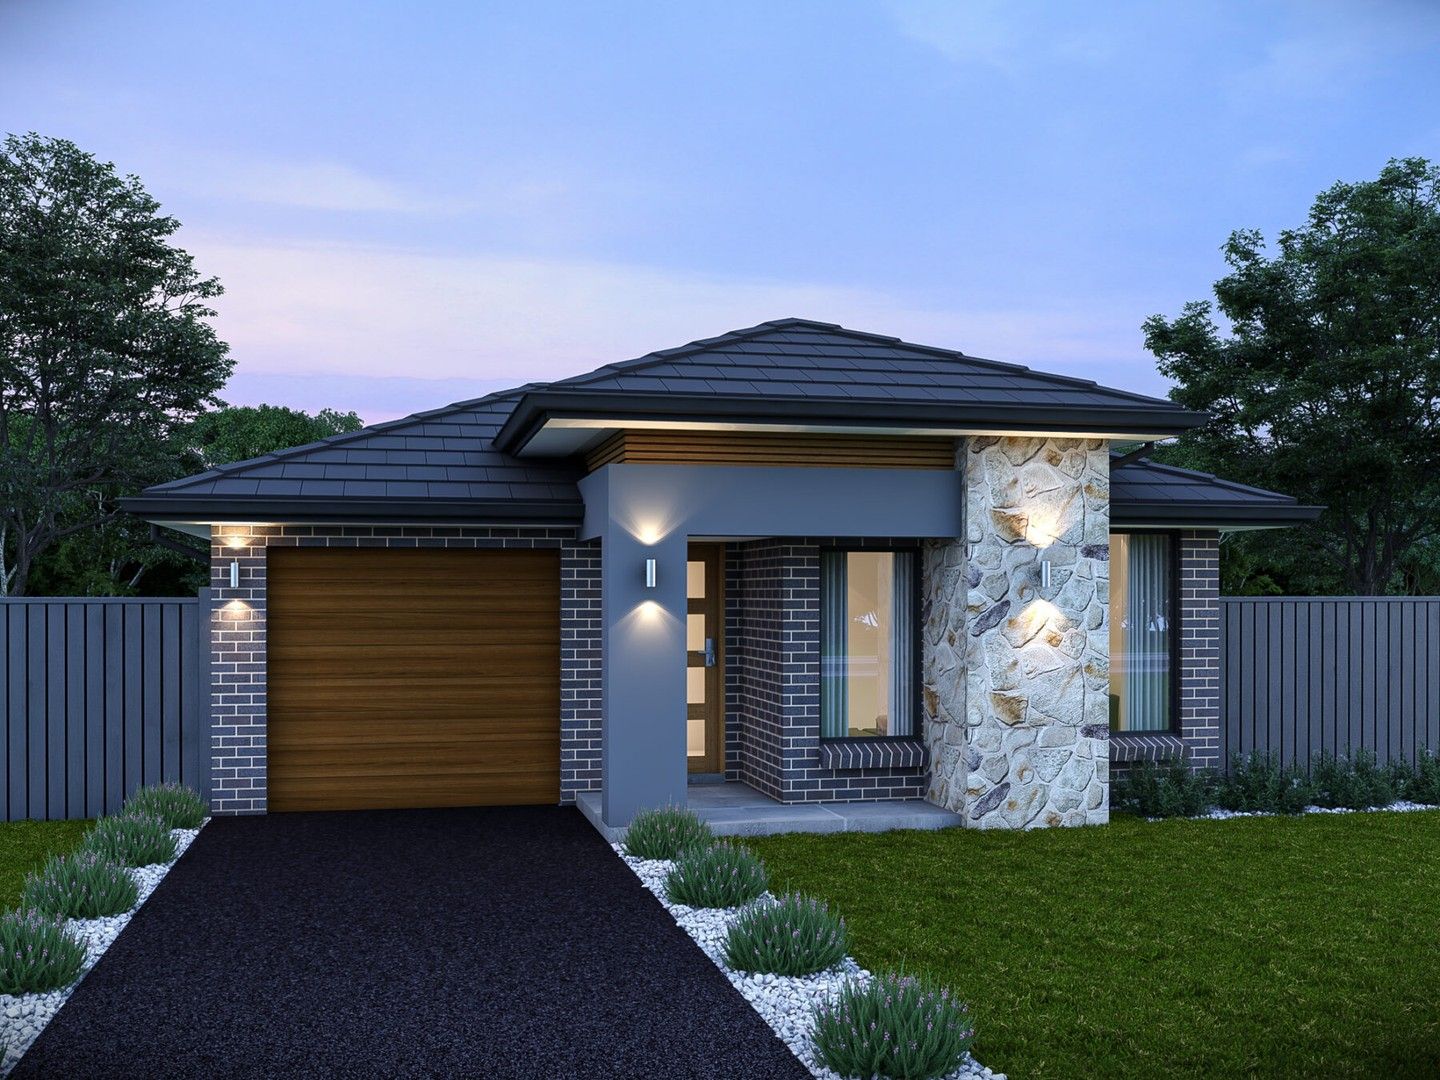 4 bedrooms New House & Land in CALL US NOW TO BOOK SITE & DISPLAY VISIT BOX HILL NSW, 2765